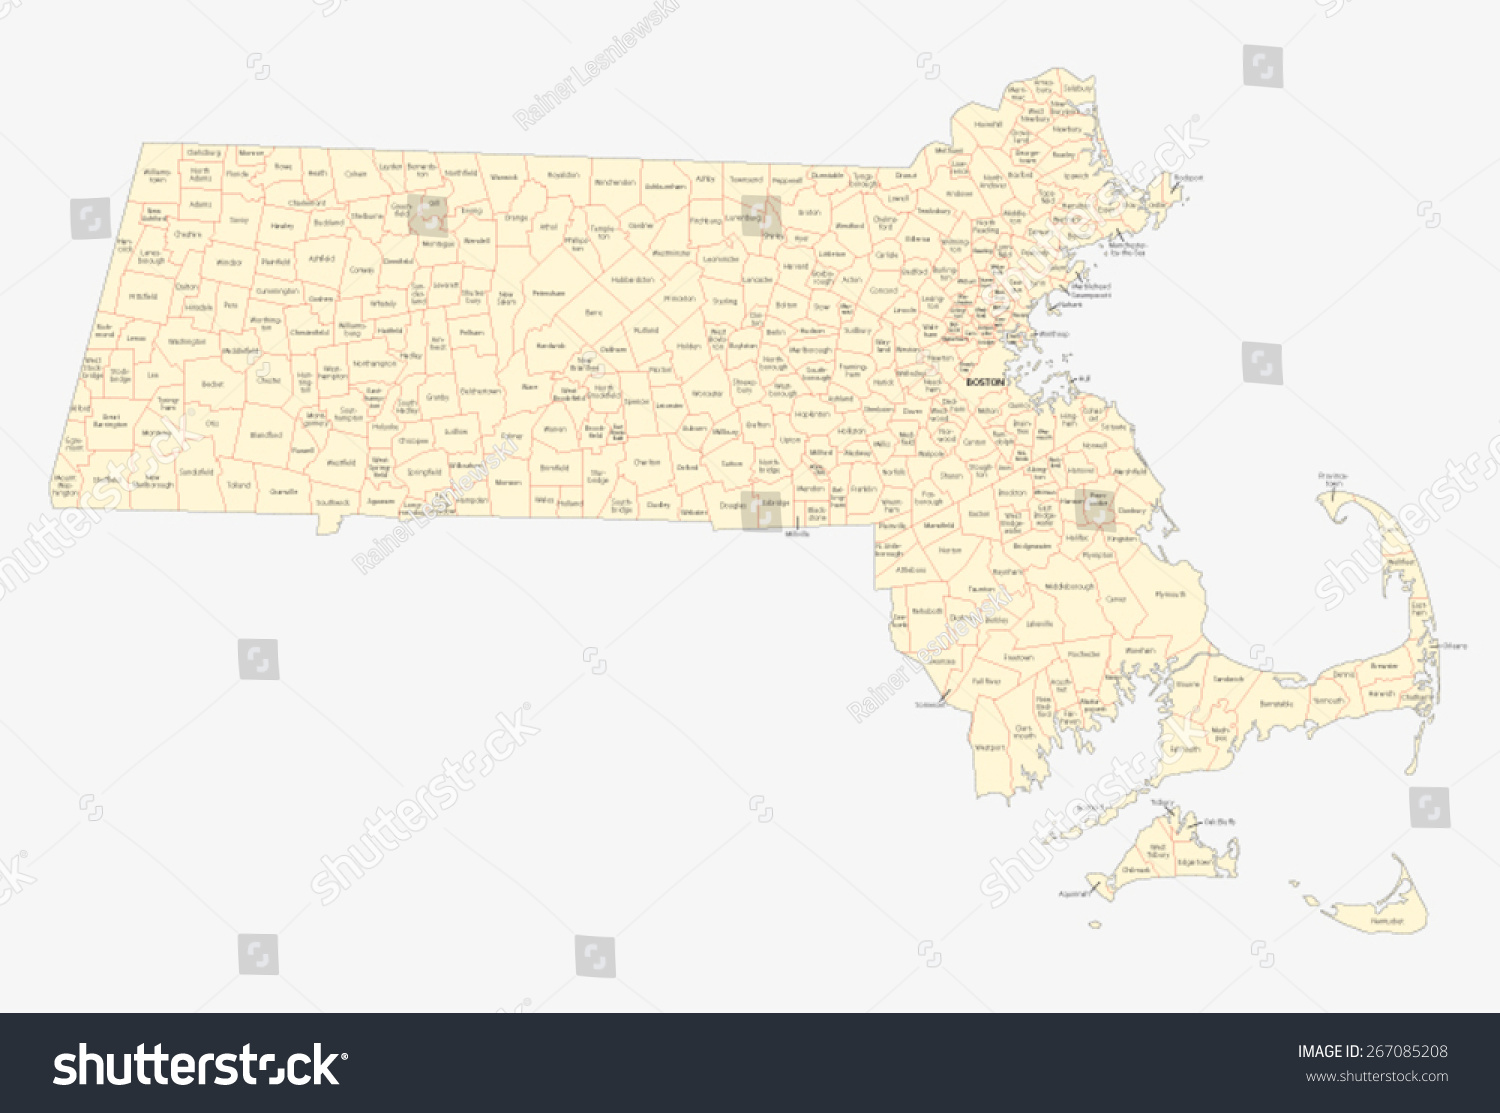 Massachusetts Cities And Towns Map Stock Vector Illustration 267085208 ...